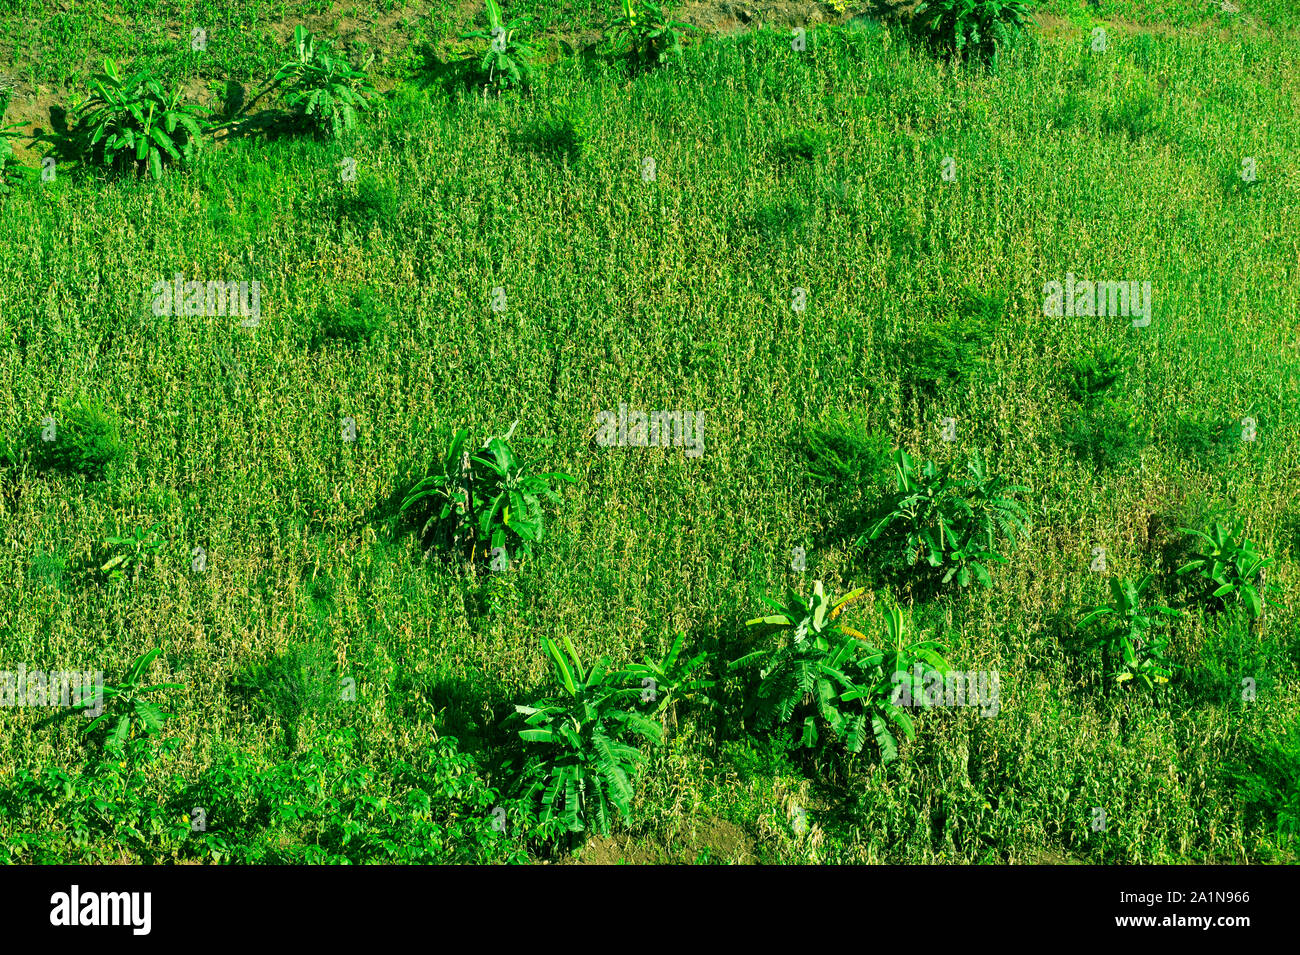 green corn and banana tree agronomy agriculture field plantation nature background Stock Photo